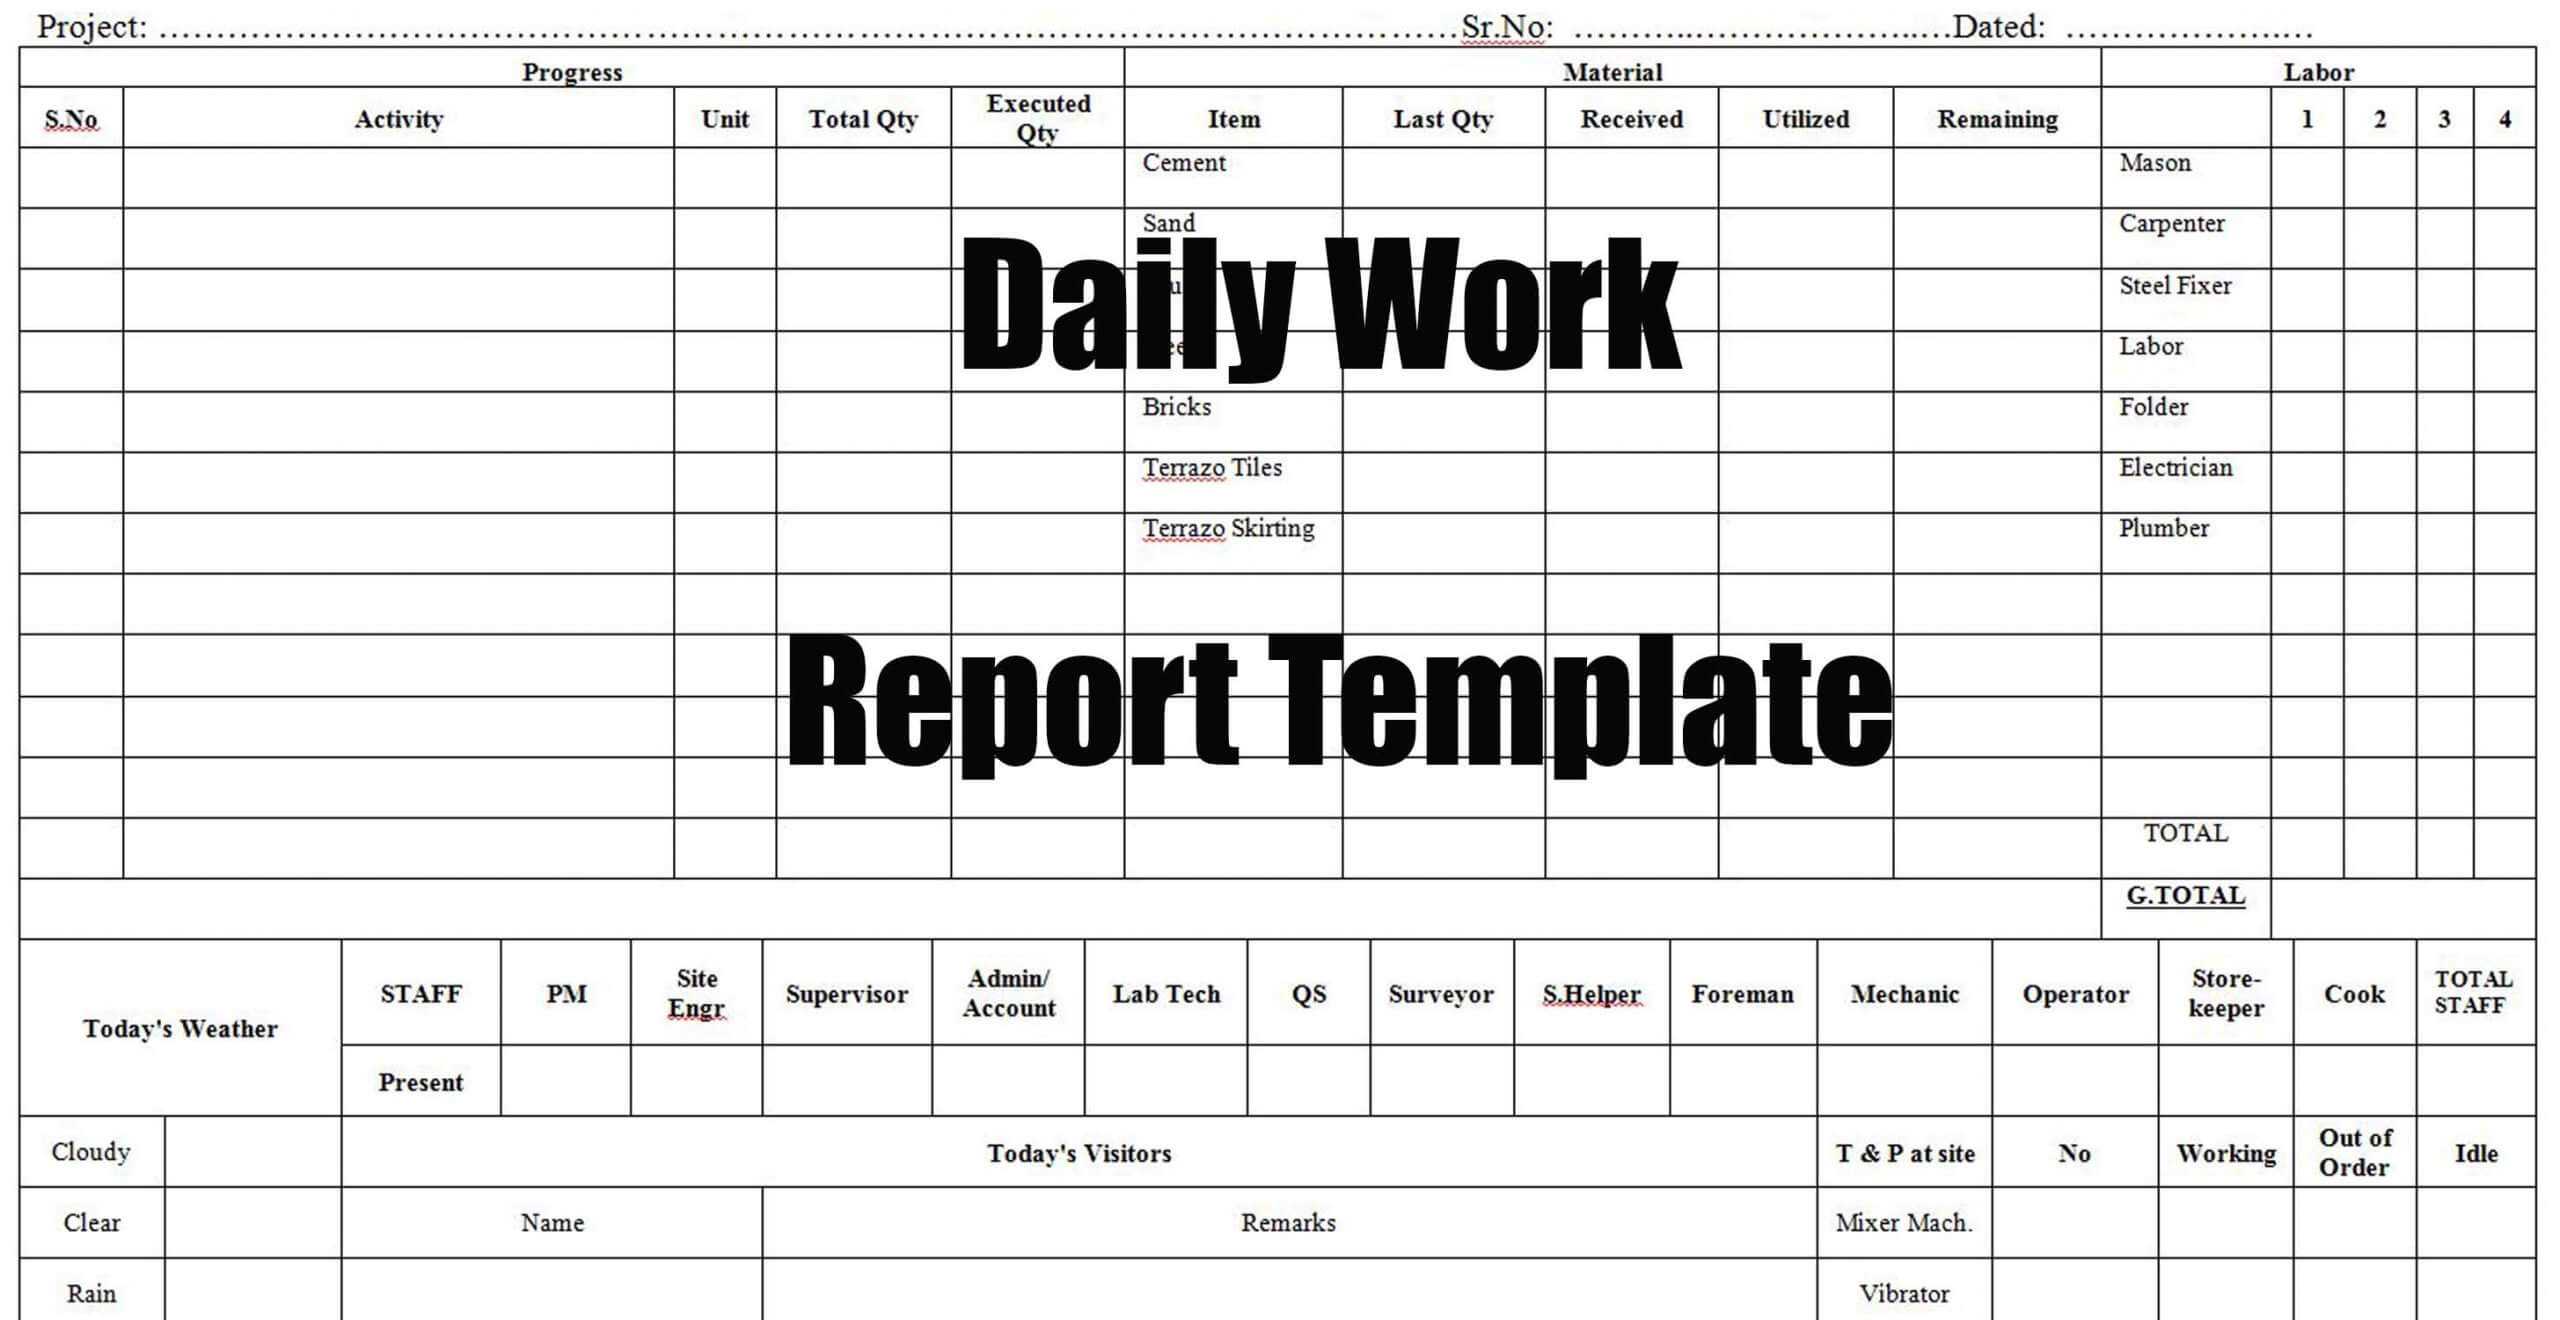 Daily Work Report Template - Engineering Discoveries For Daily Work Report Template